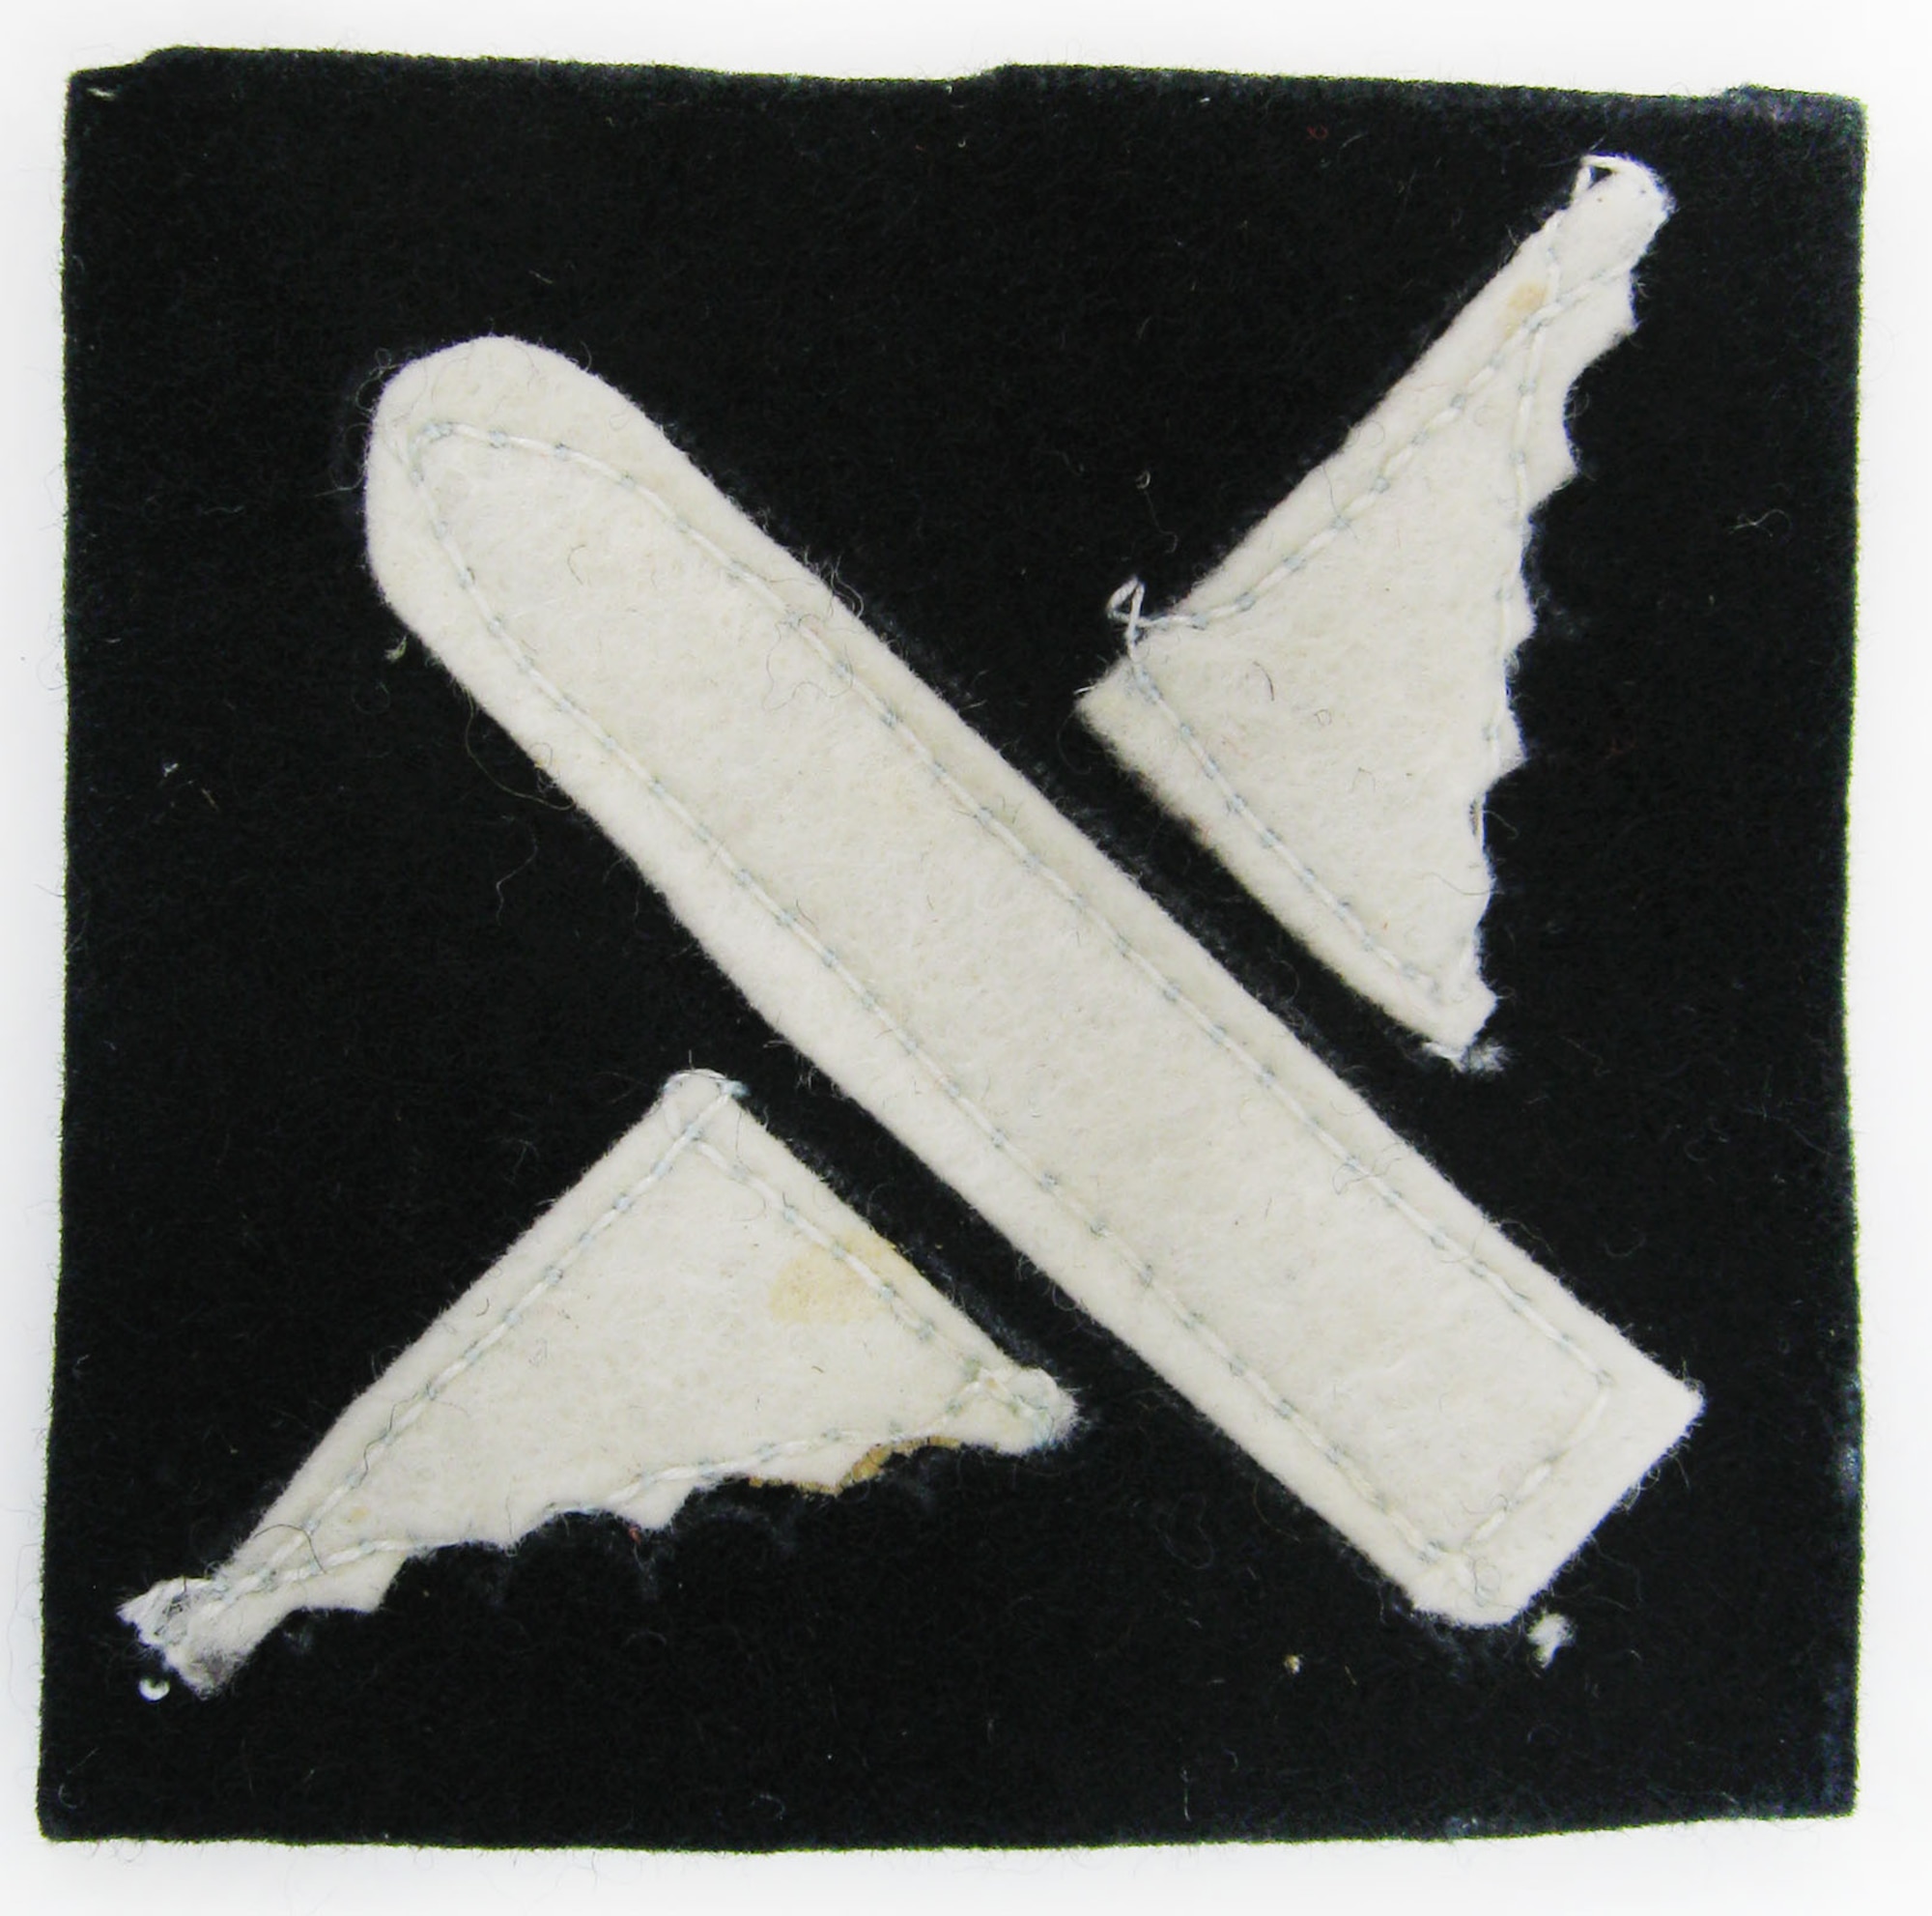 This winged ammunition patch is the insignia for U.S. anti-aircraft units during World War I. With anti-aircraft being in its wartime infancy during WWI, U.S. Army anti-aircraft personnel had to learn in the field. These soldiers quickly gained proficiency in how to set up the weapon and measure size, distance and speed of the target, all by hand, as instruments for this purpose had not yet been developed or produced. (U.S. Air Force photo)